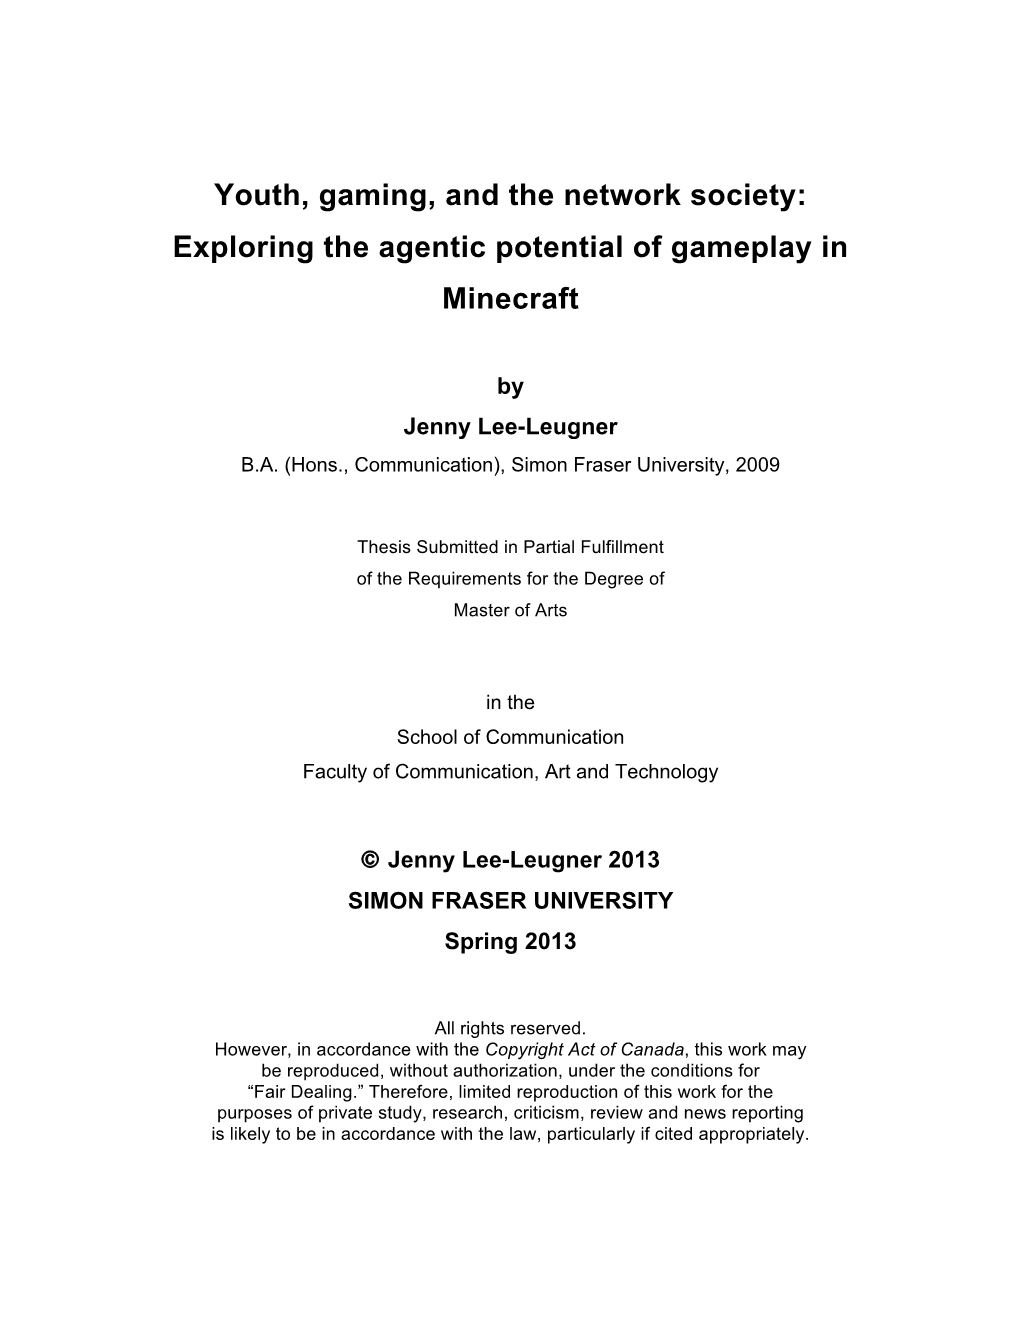 Youth, Gaming, and the Network Society: Exploring the Agentic Potential of Gameplay in Minecraft